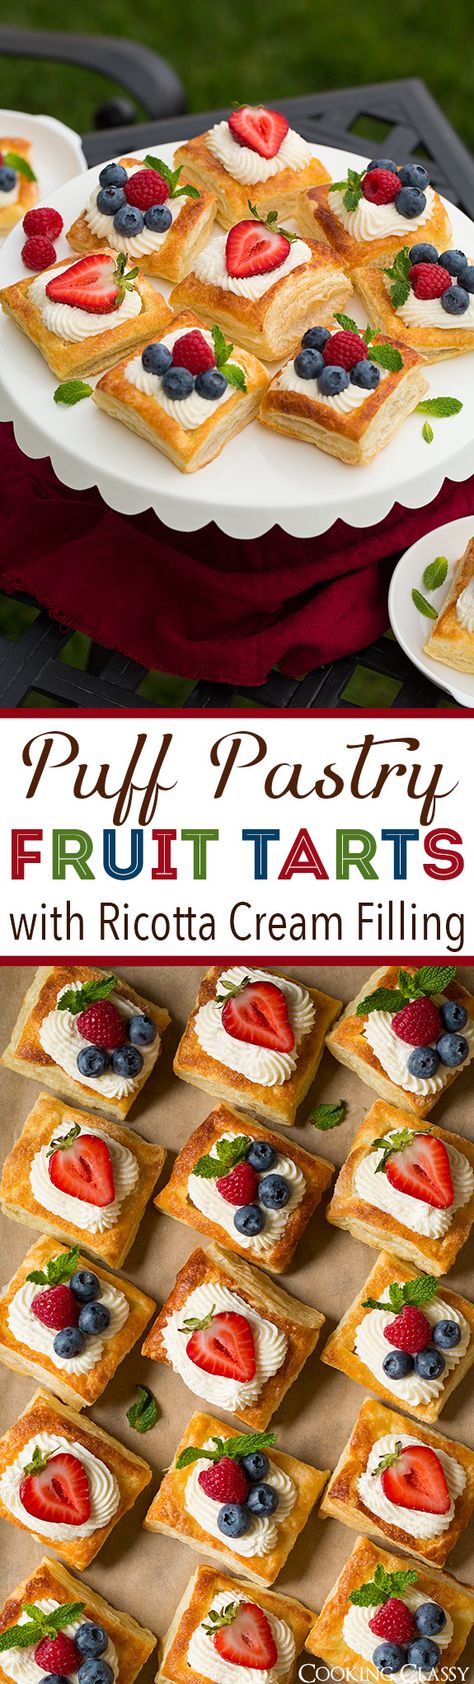 Puff Pastry Fruit Tarts with Ricotta Cream Filling - one of the BEST summer desserts! Oh so flaky pastry, rich creamy ricotta filling, and sweet fresh fruit. Can't wait to make them again!! Cake, Pie, Desserts, Pasta, Dessert, Patisserie, Puff Pastry, Puff Pastries, Puff Pastry Recipes